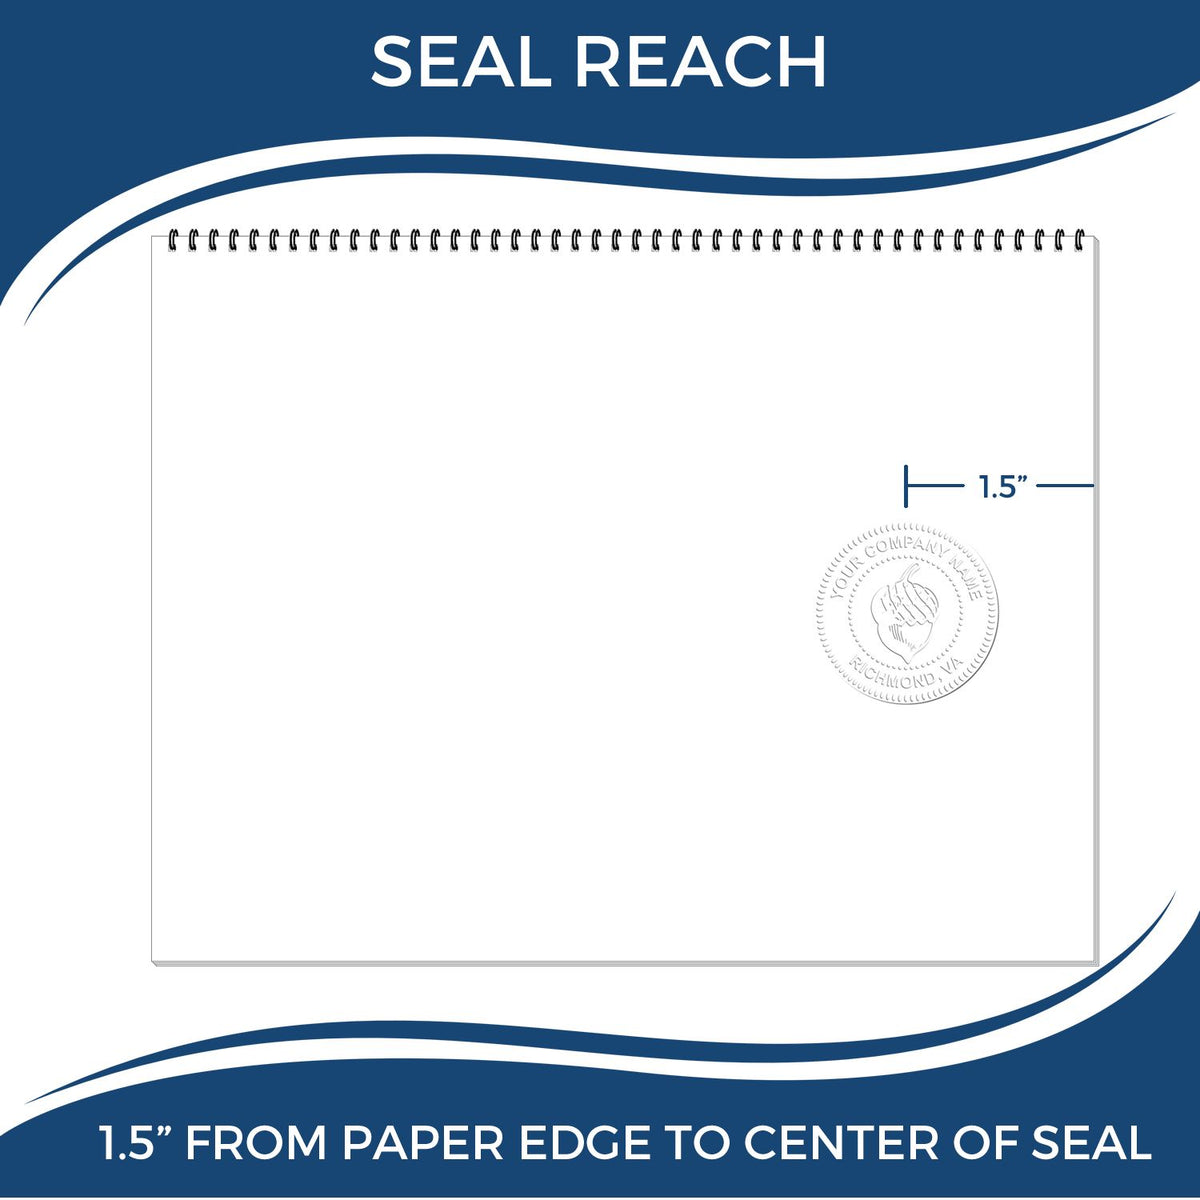 An infographic showing the seal reach which is represented by a ruler and a miniature seal image of the Illinois Desk Architect Embossing Seal